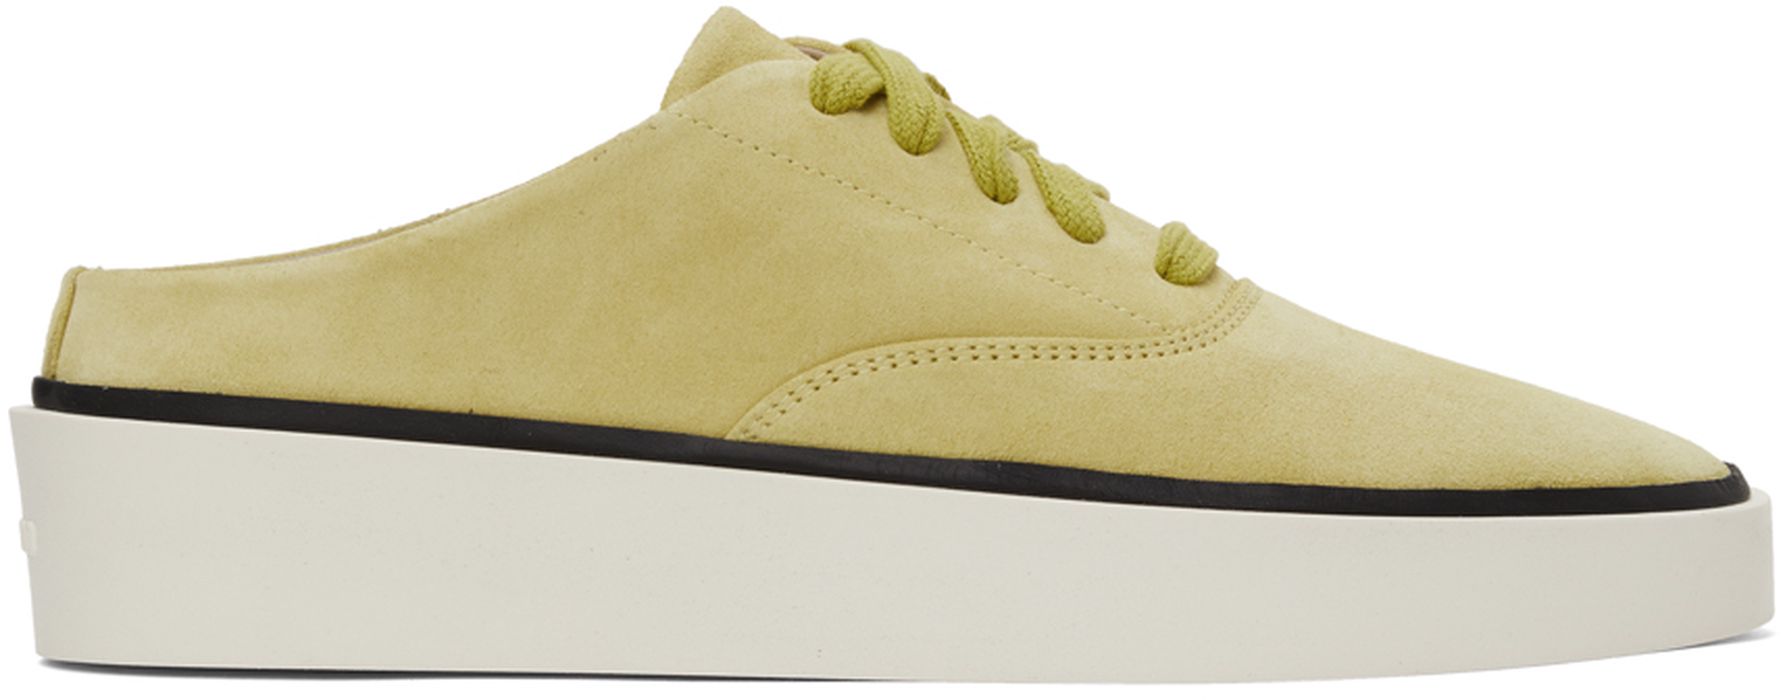 Fear of God Green Suede 101 Backless Sneakers